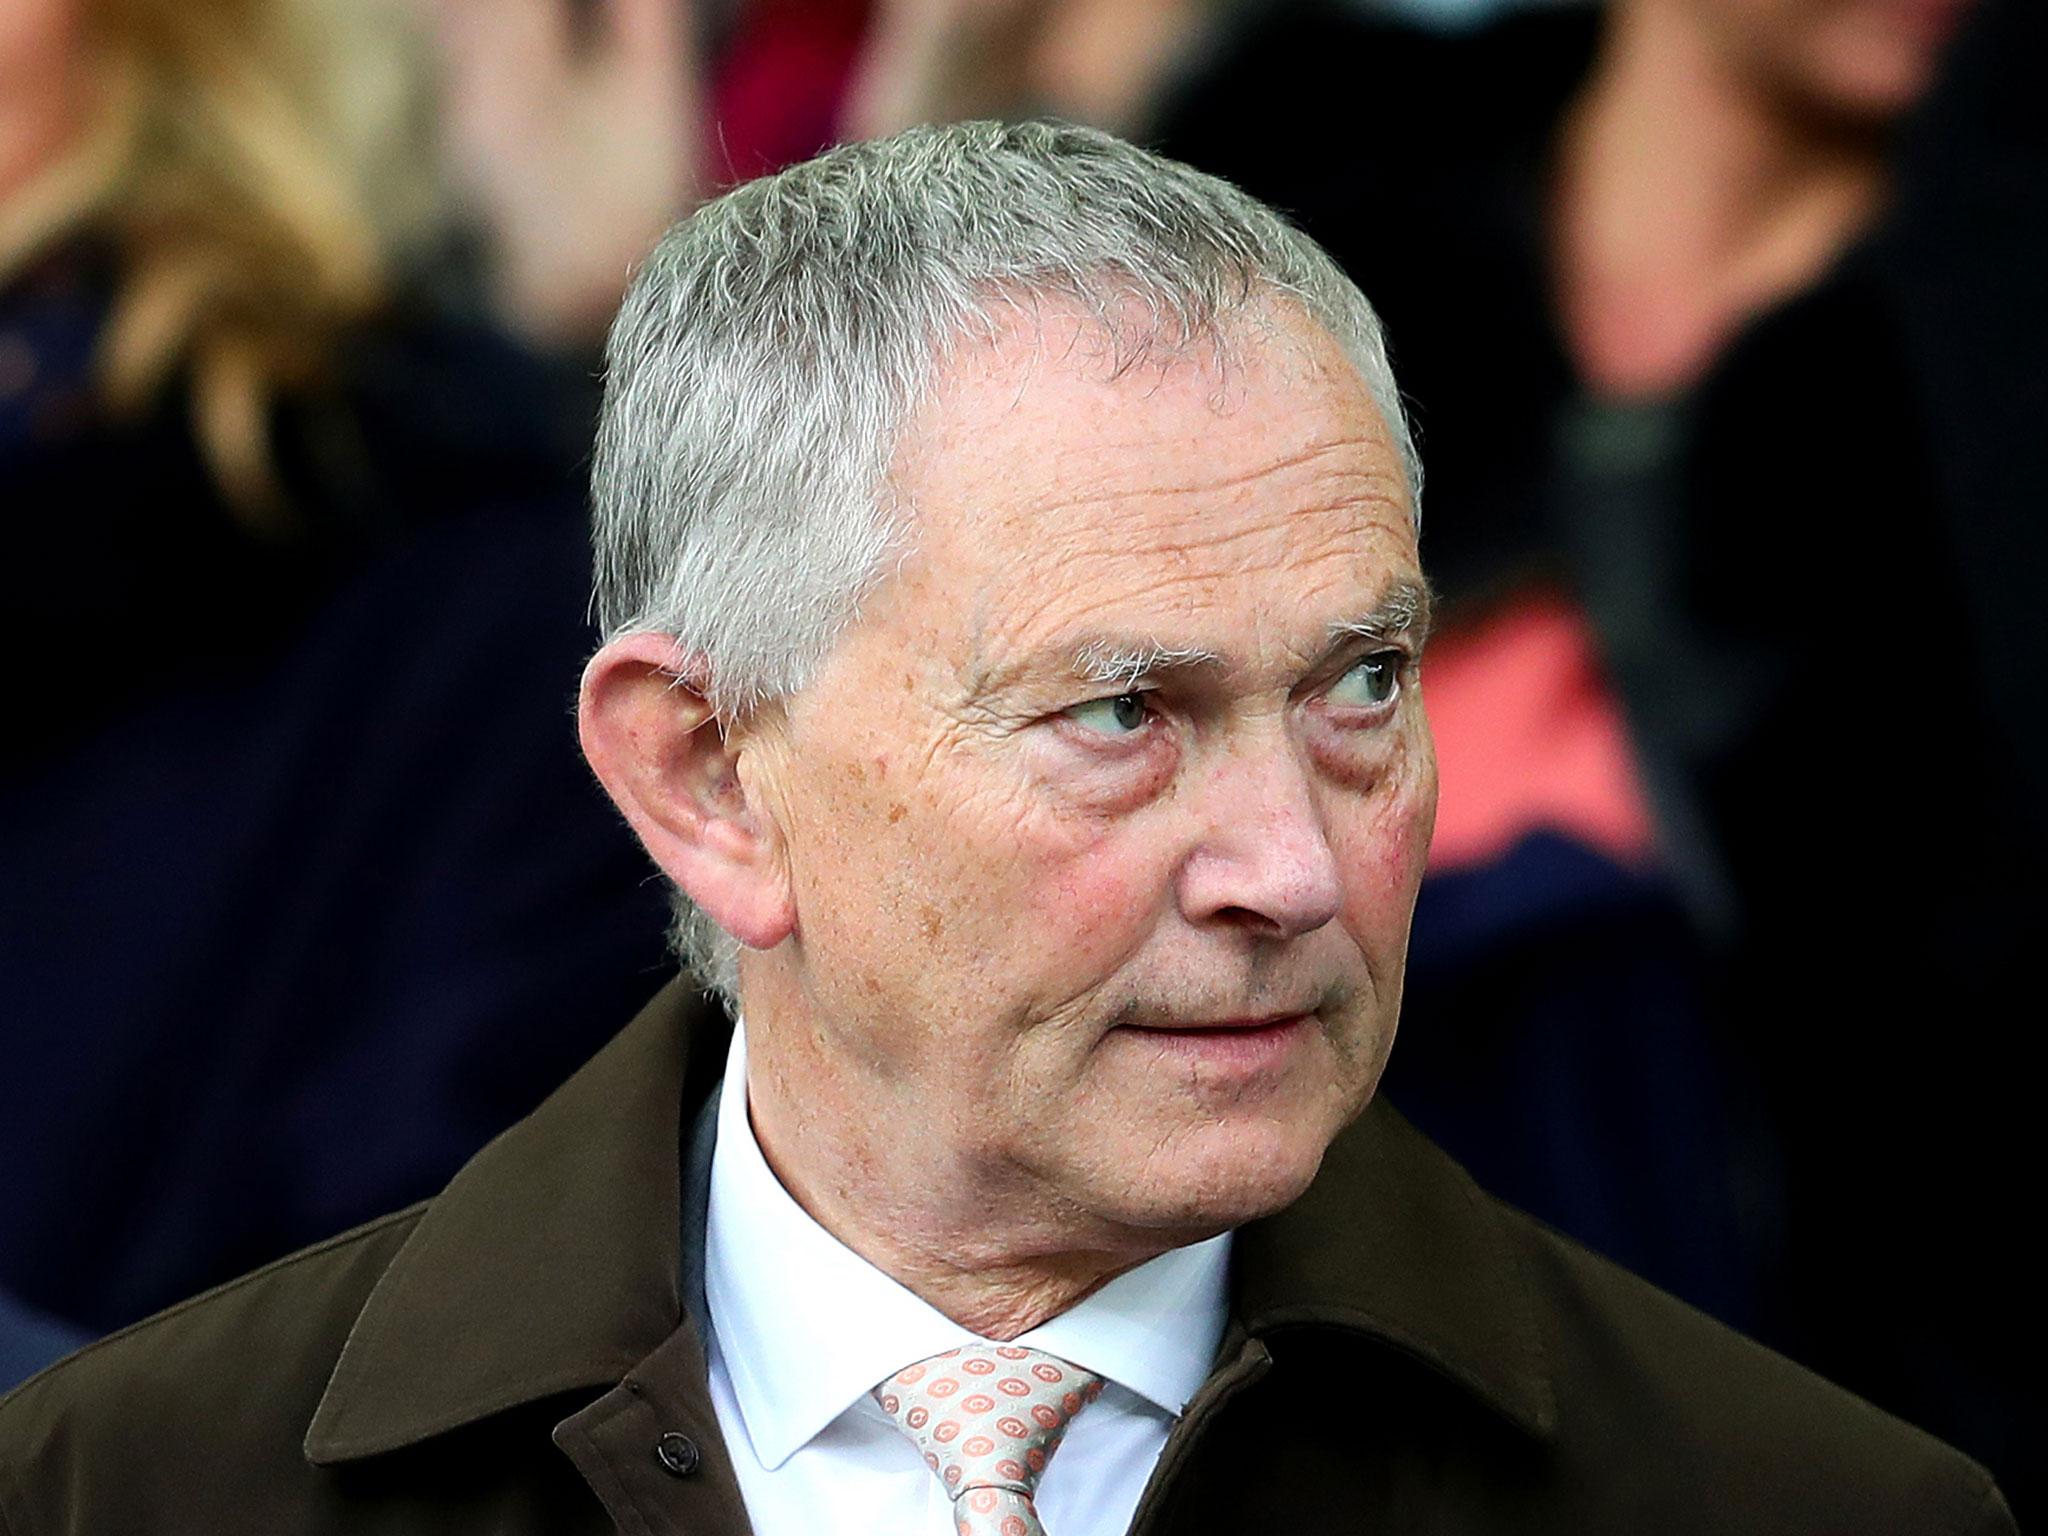 Richard Scudamore has been consistent in attending each and every one of the Football Foundations’ investors’ meetings